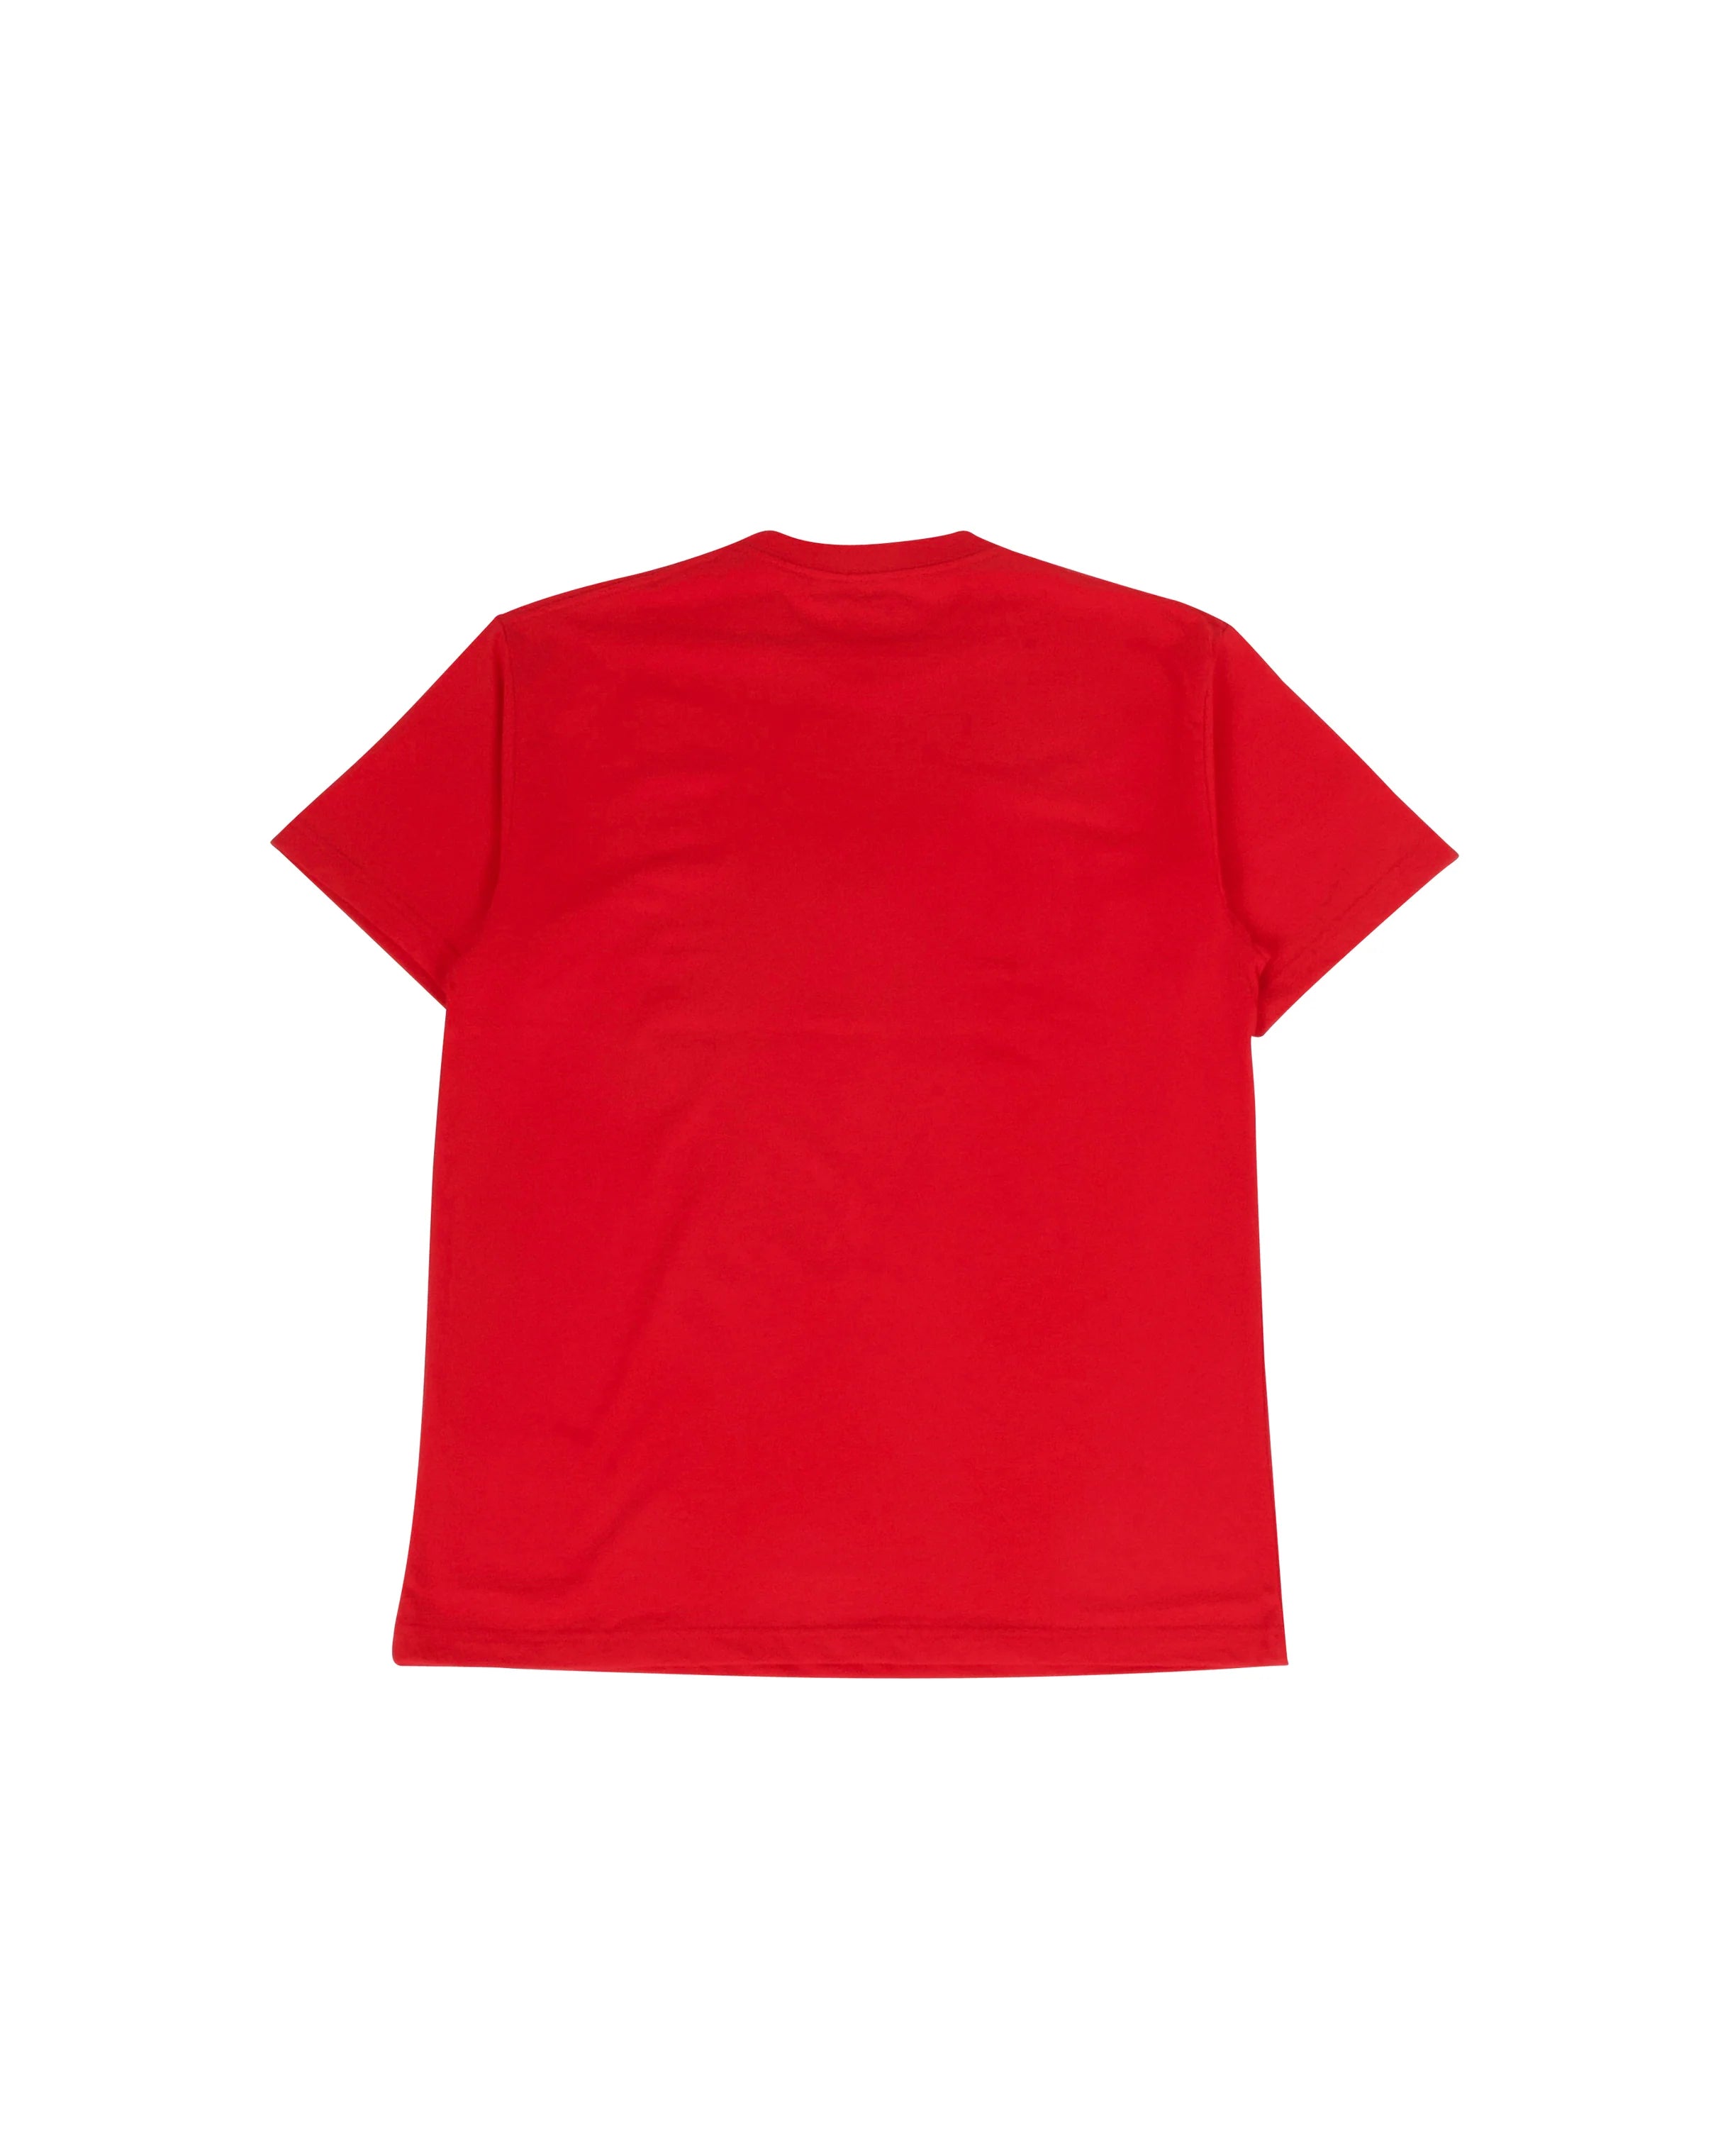 SHY TOWN TEE RED